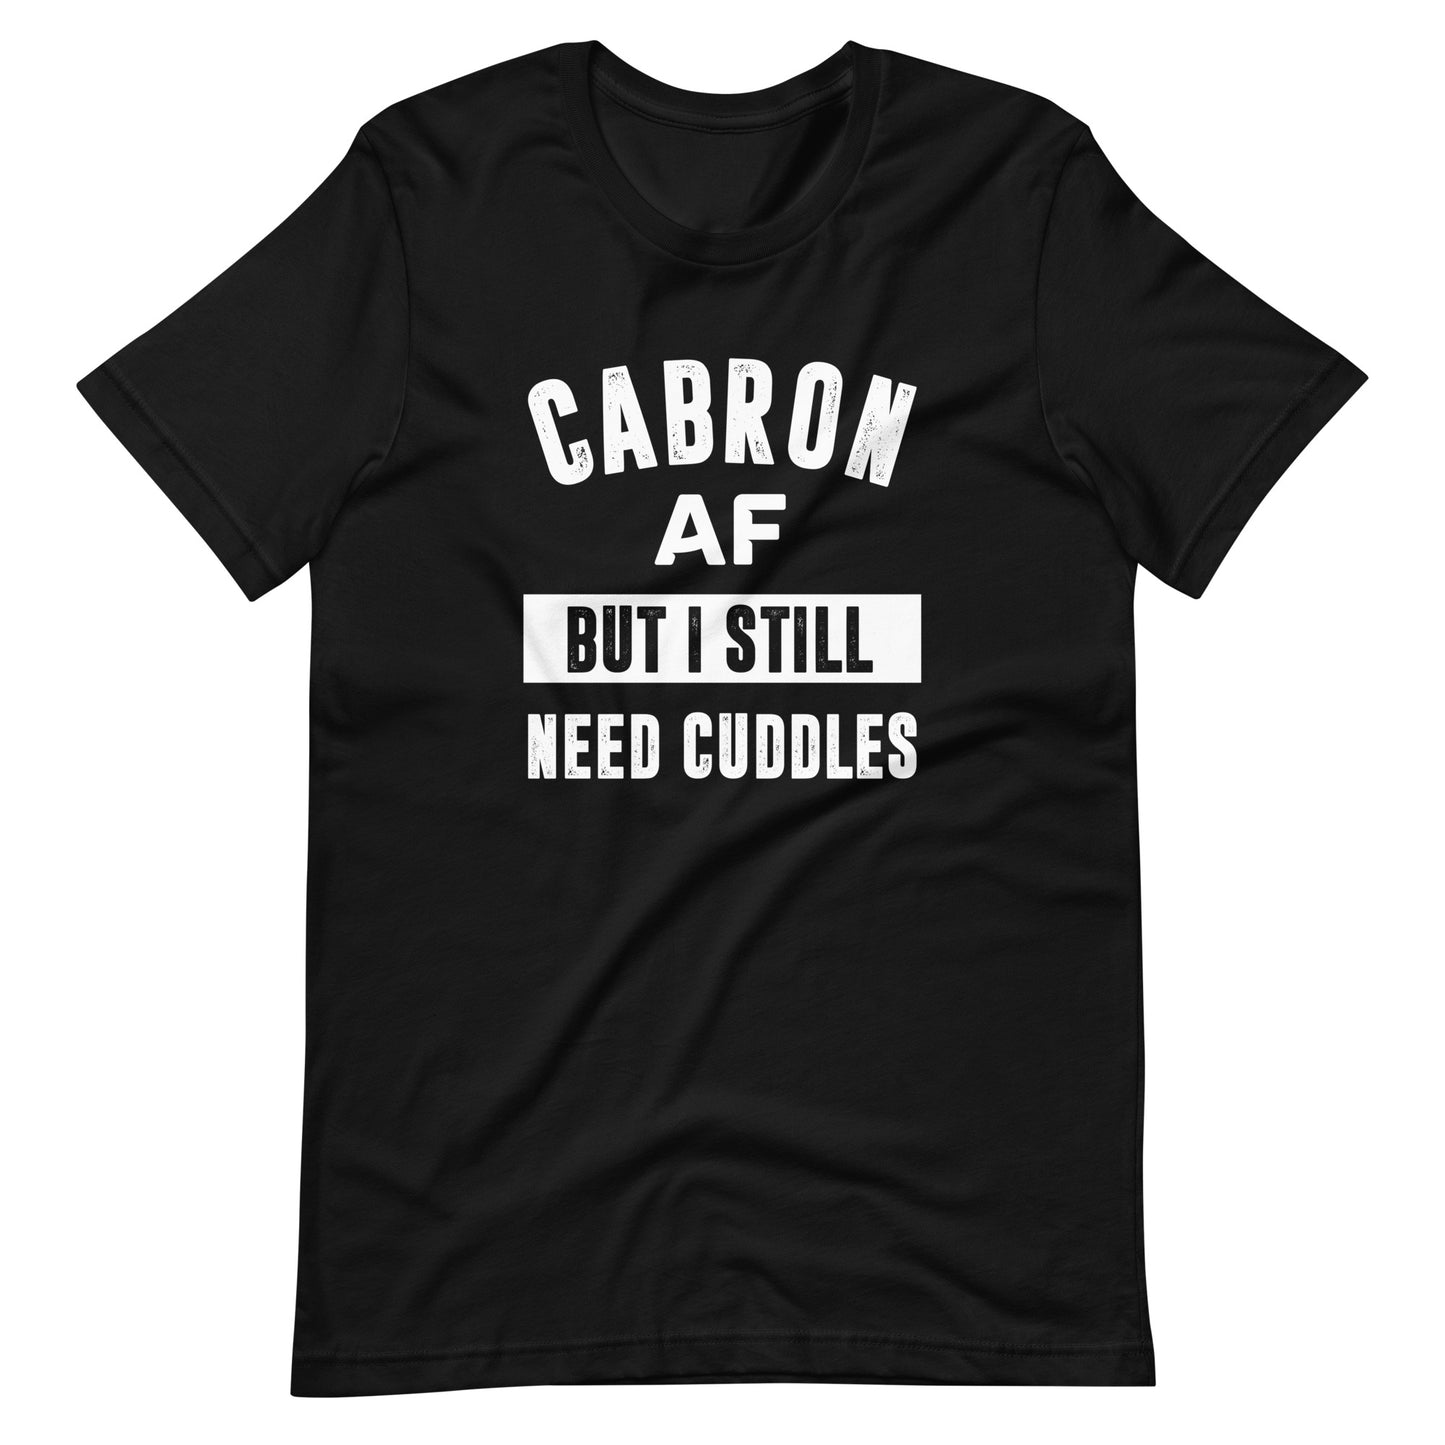 Cabron AF But I Still Need Cuddles T-Shirt for Latino